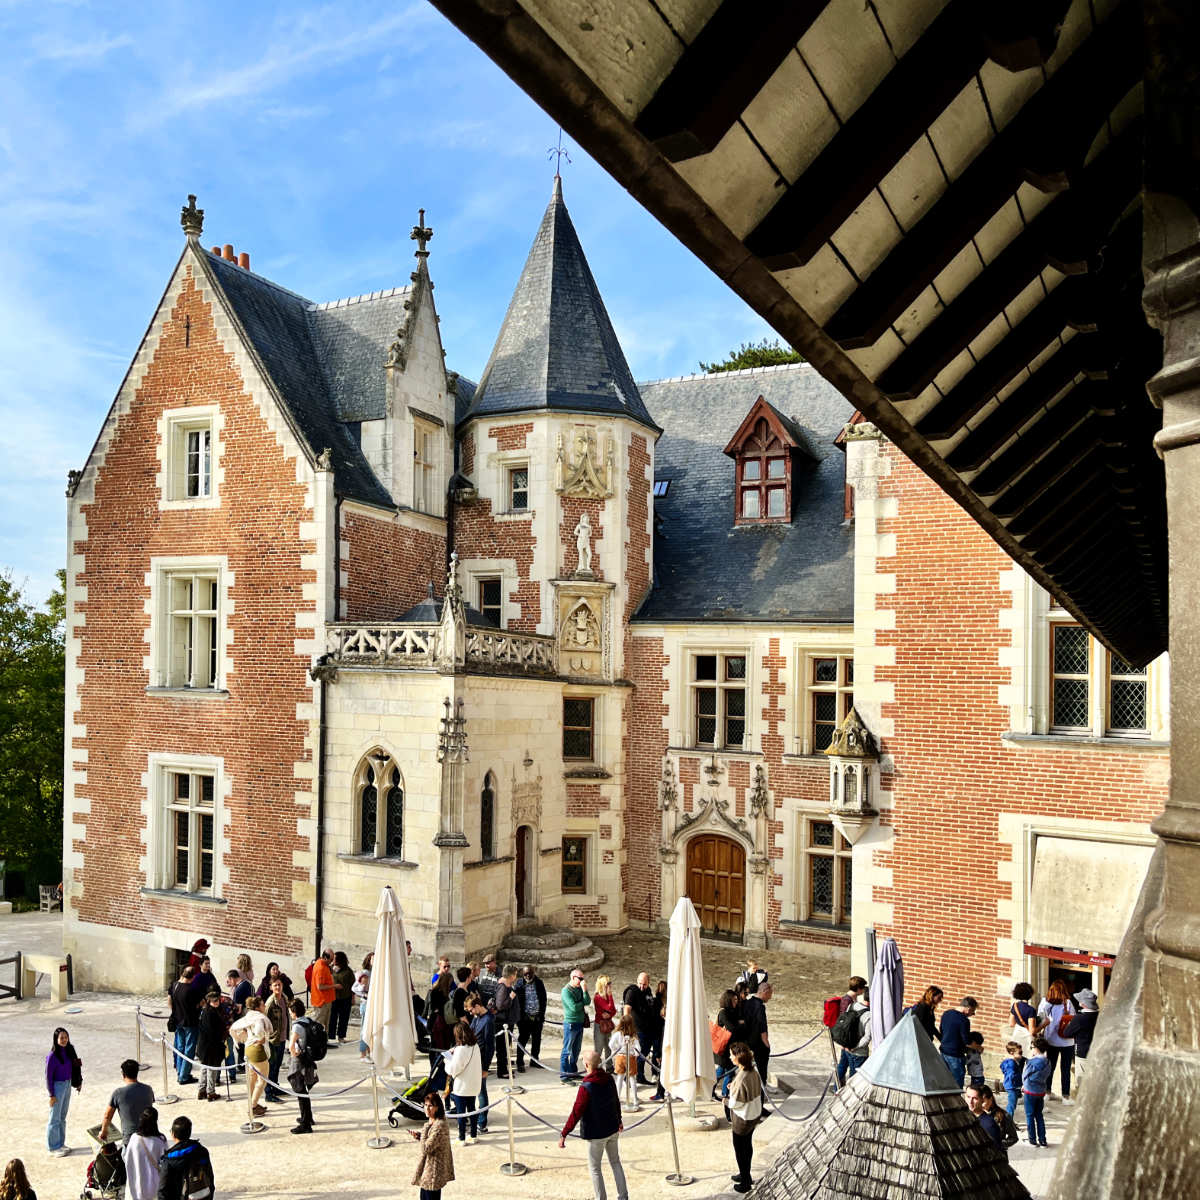 You are currently viewing Leonardo da Vinci’s Clos Lucé: Guide and History (Loire)